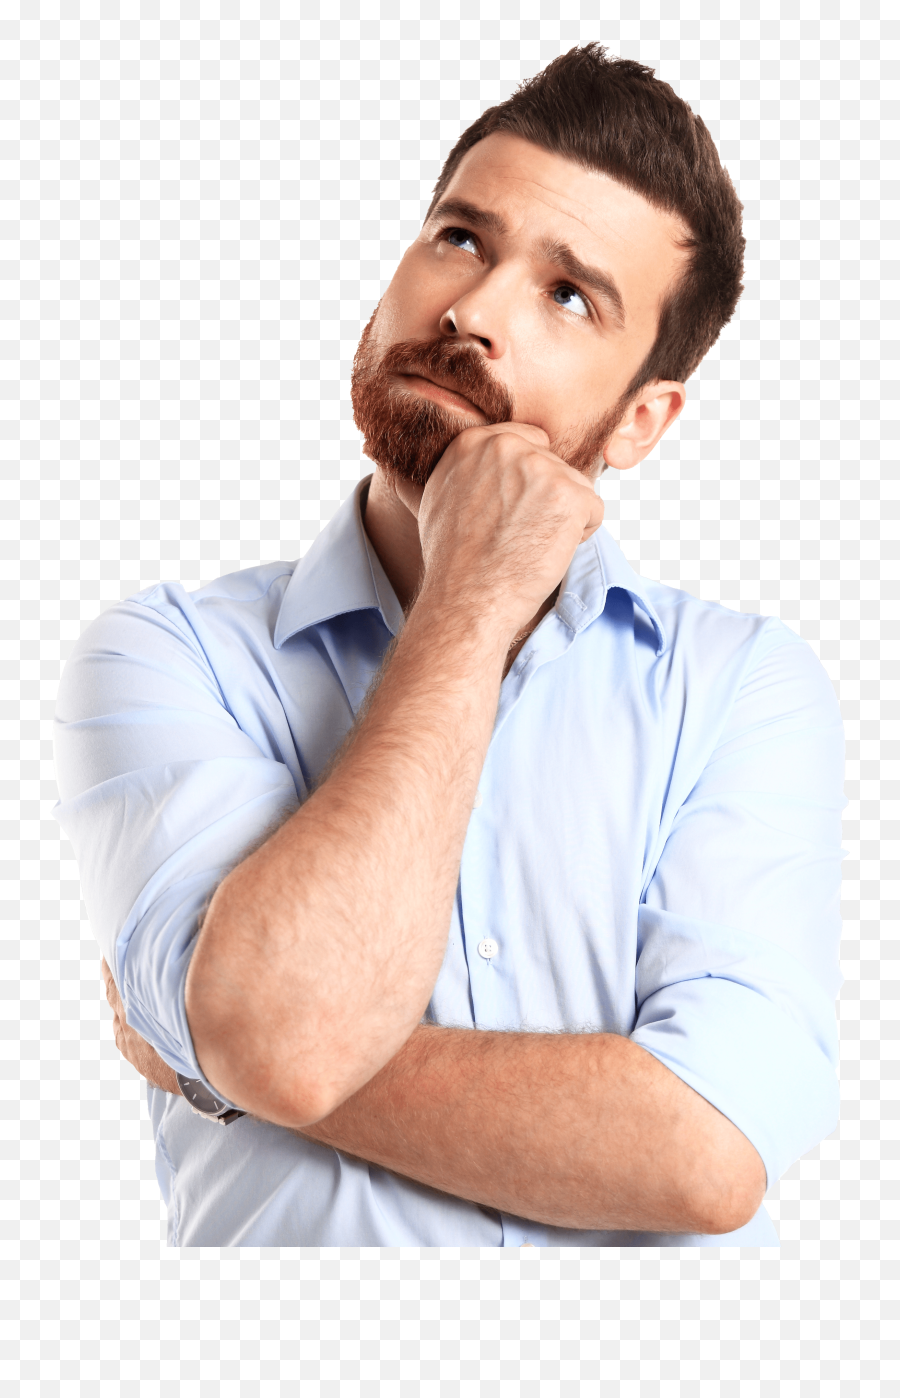 Thinking Man Download Transparent Png Image Png Arts Emoji,Thinking Emoji With Thinking Balloon Image Without Background